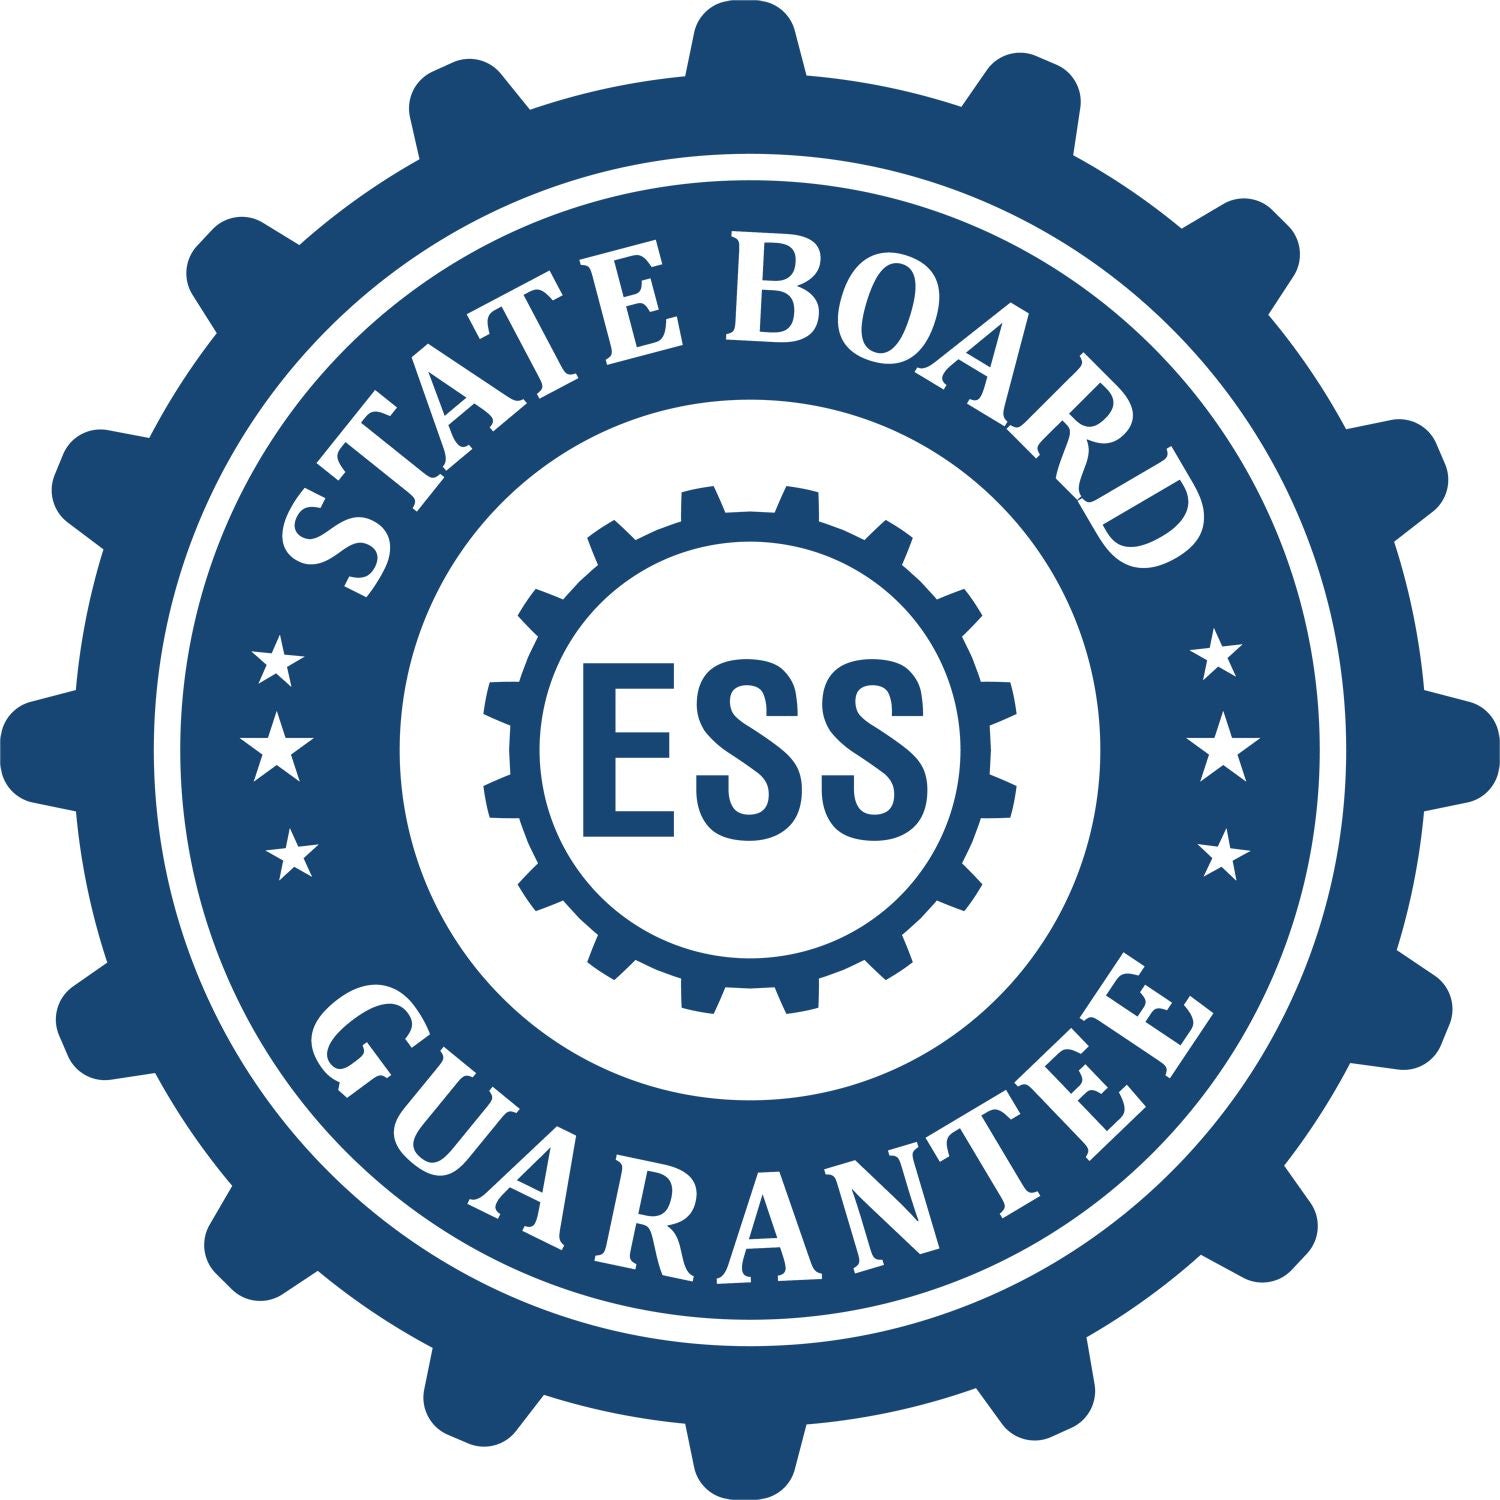 An emblem in a gear shape illustrating a state board guarantee for the Hybrid Alabama Land Surveyor Seal